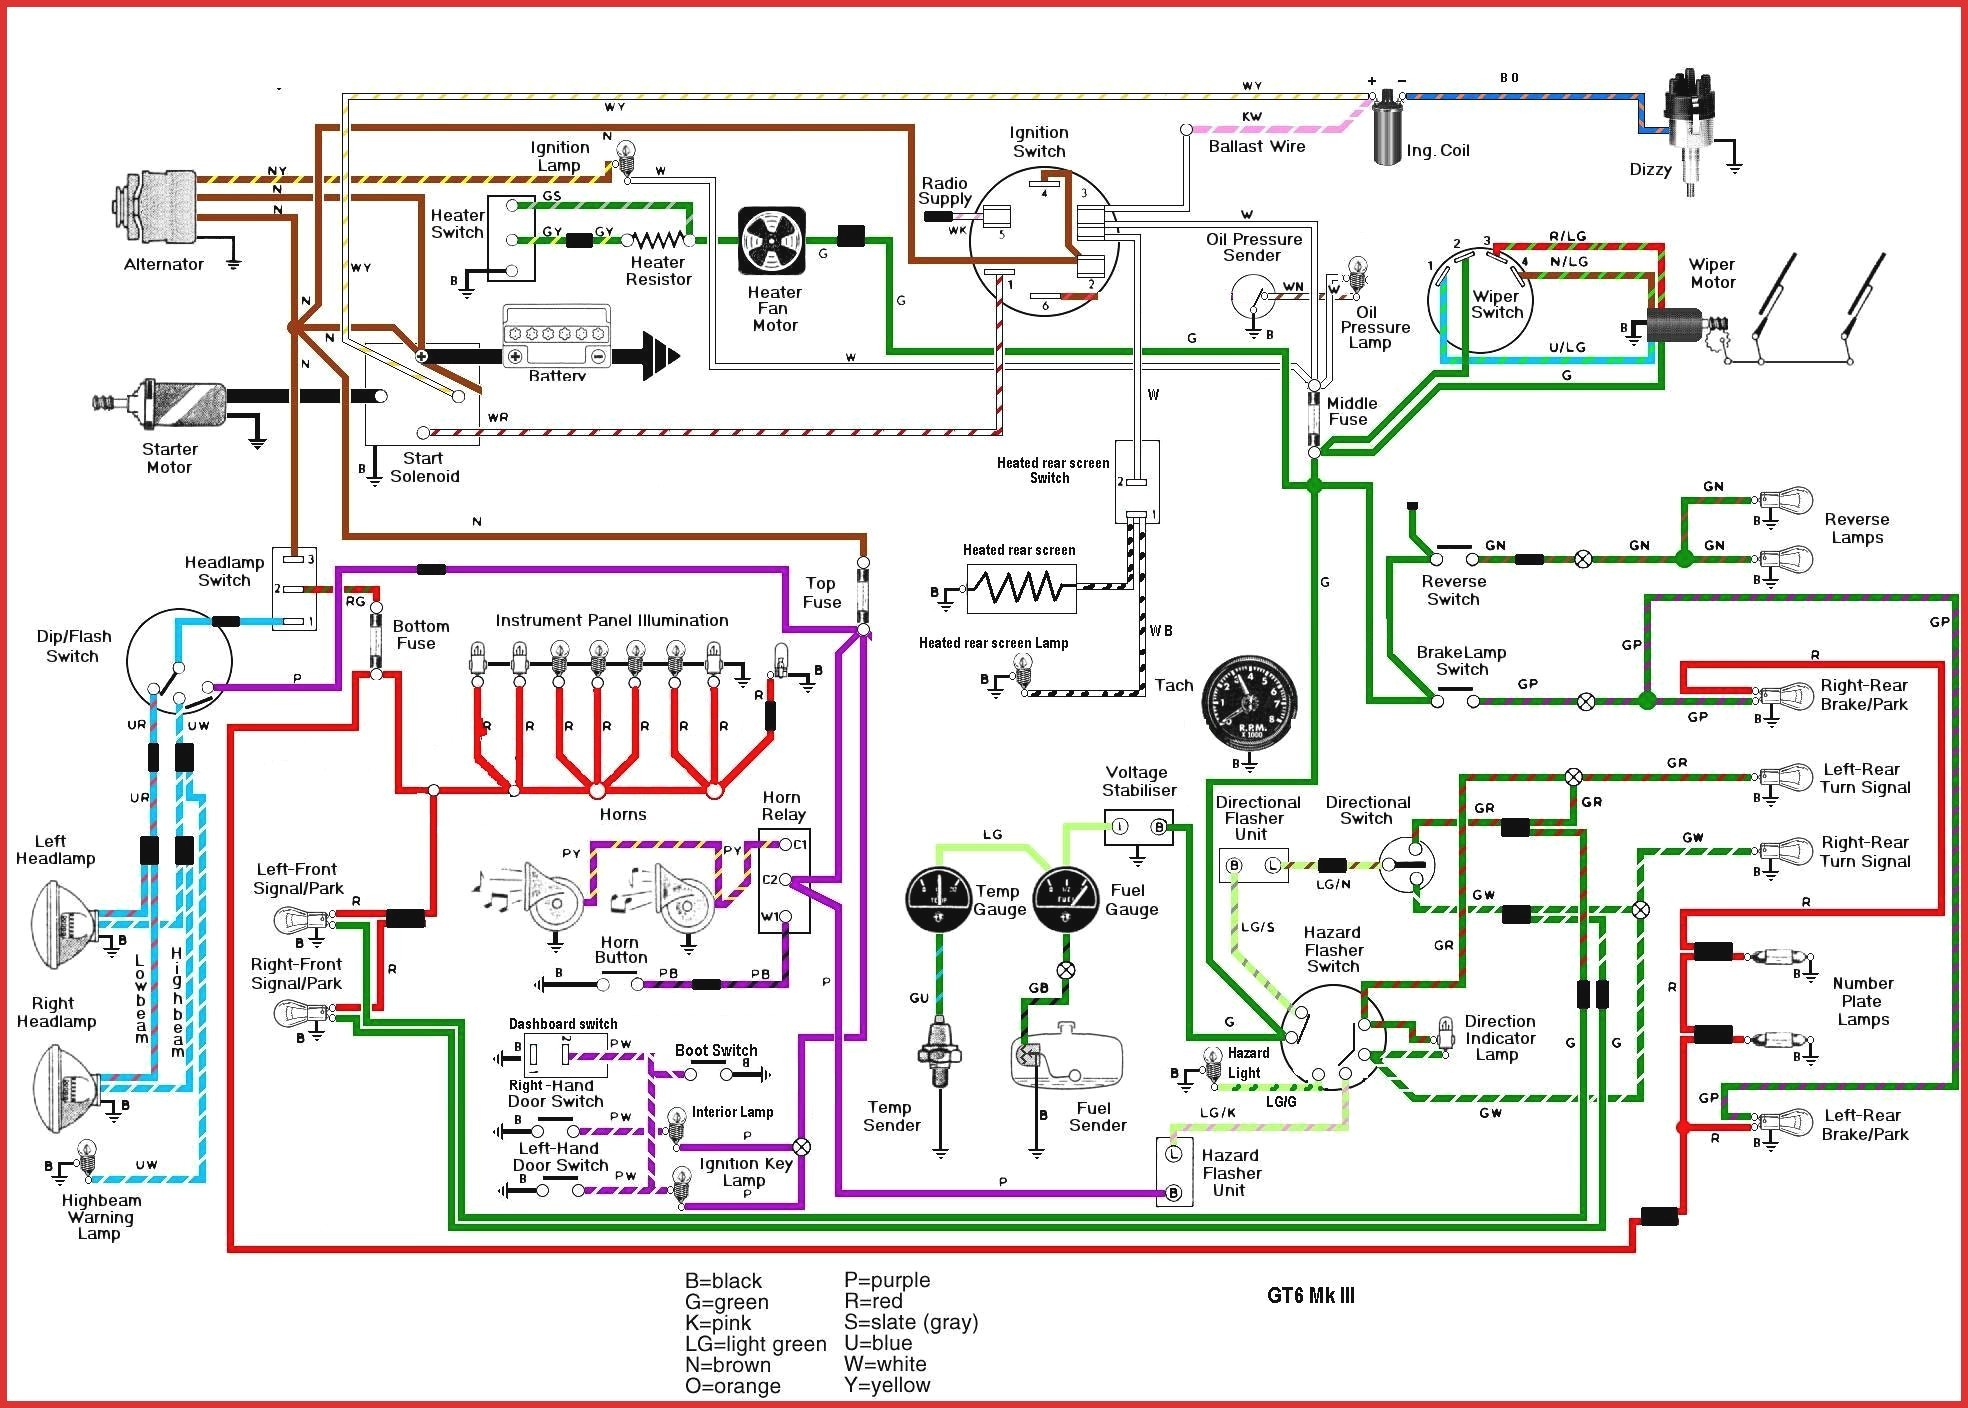 Latest Electrical Wiring Diagram House Electric Circuit Data New Electrical Wiring Diagram House